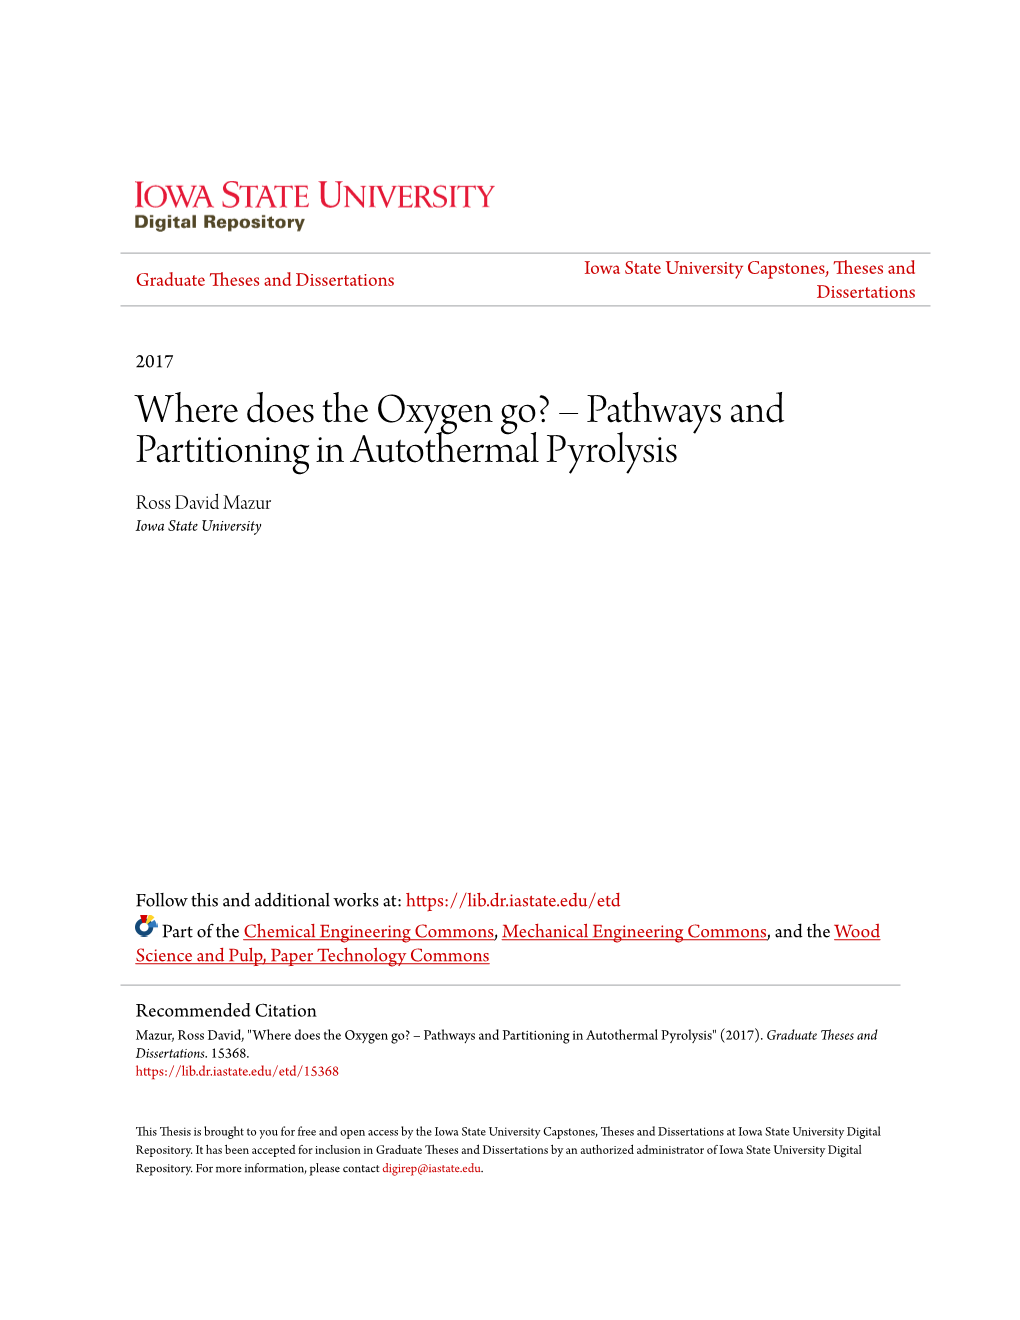 Pathways and Partitioning in Autothermal Pyrolysis Ross David Mazur Iowa State University